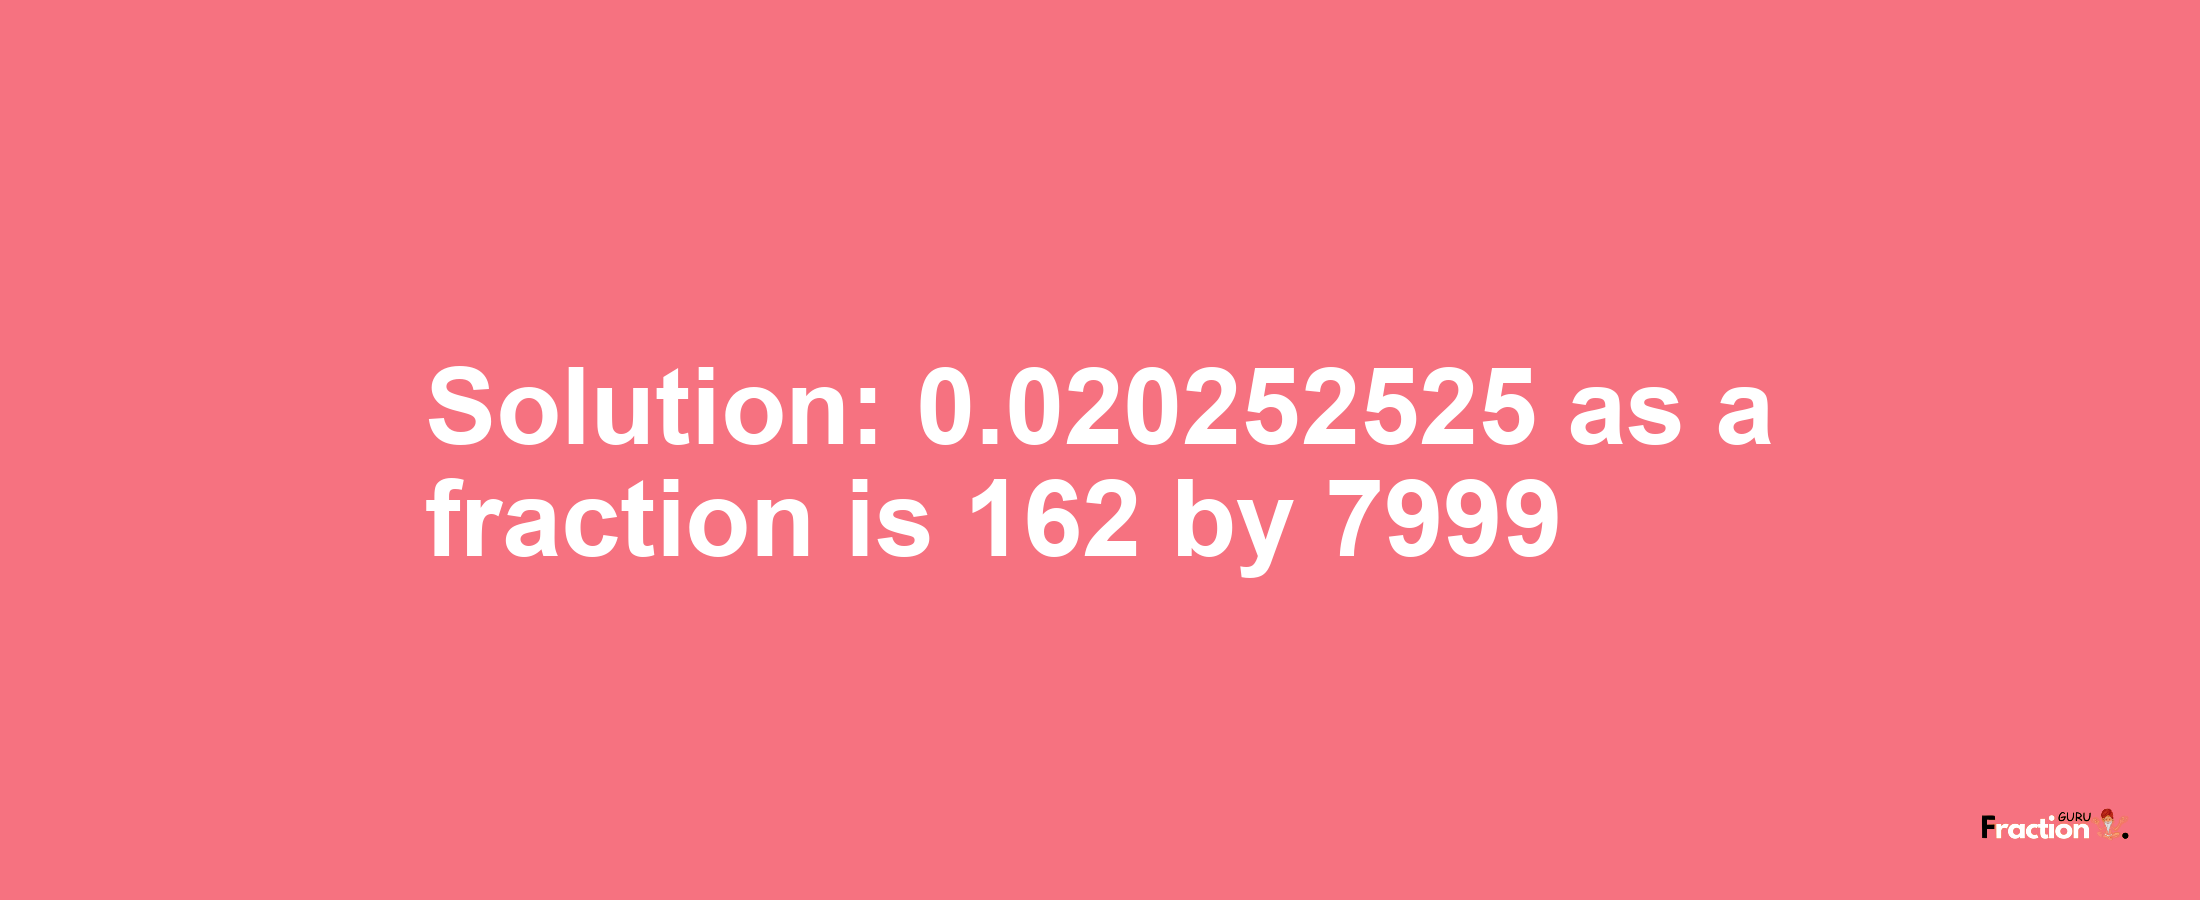 Solution:0.020252525 as a fraction is 162/7999